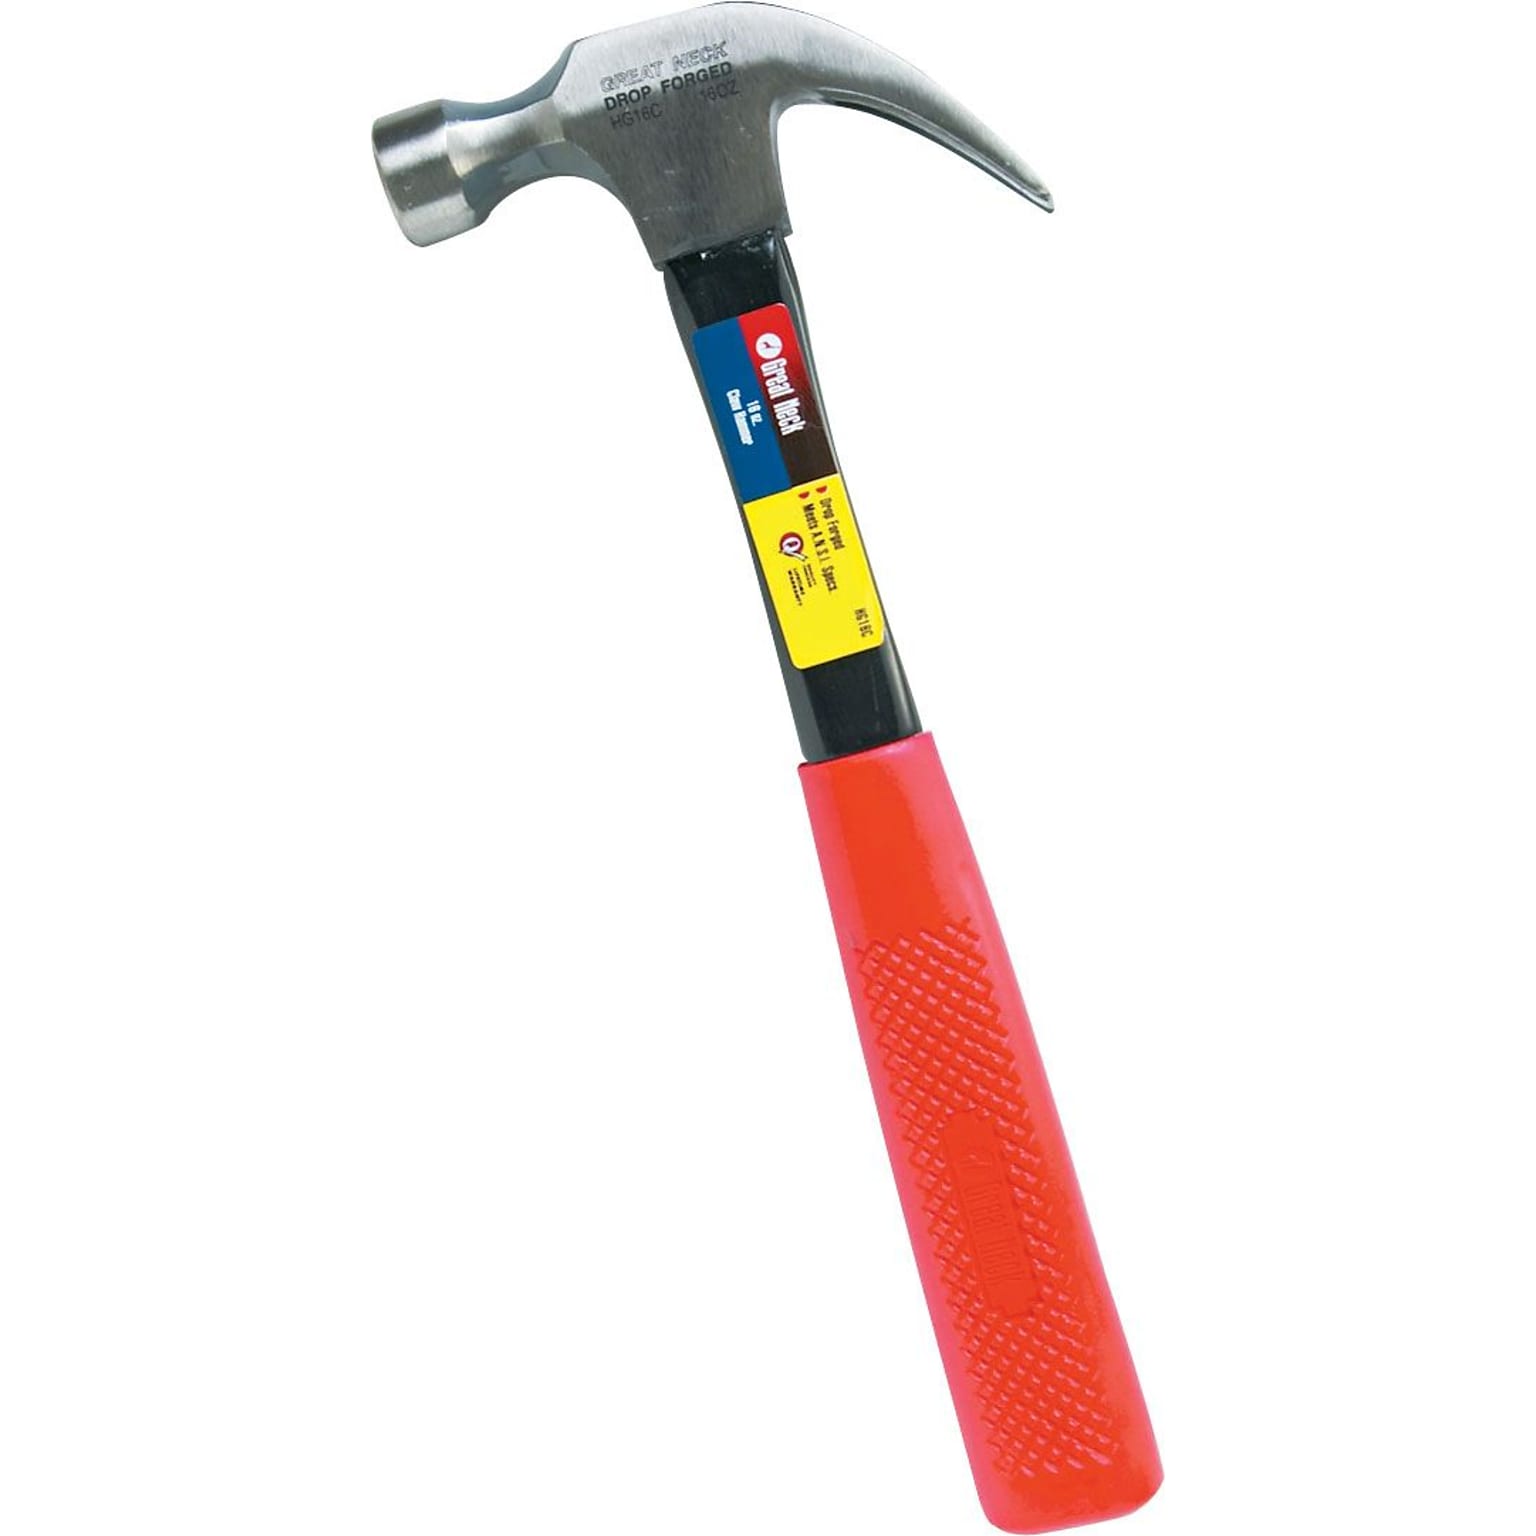 Great Neck® Claw Hammer, 16oz. With Fiberglass Handle